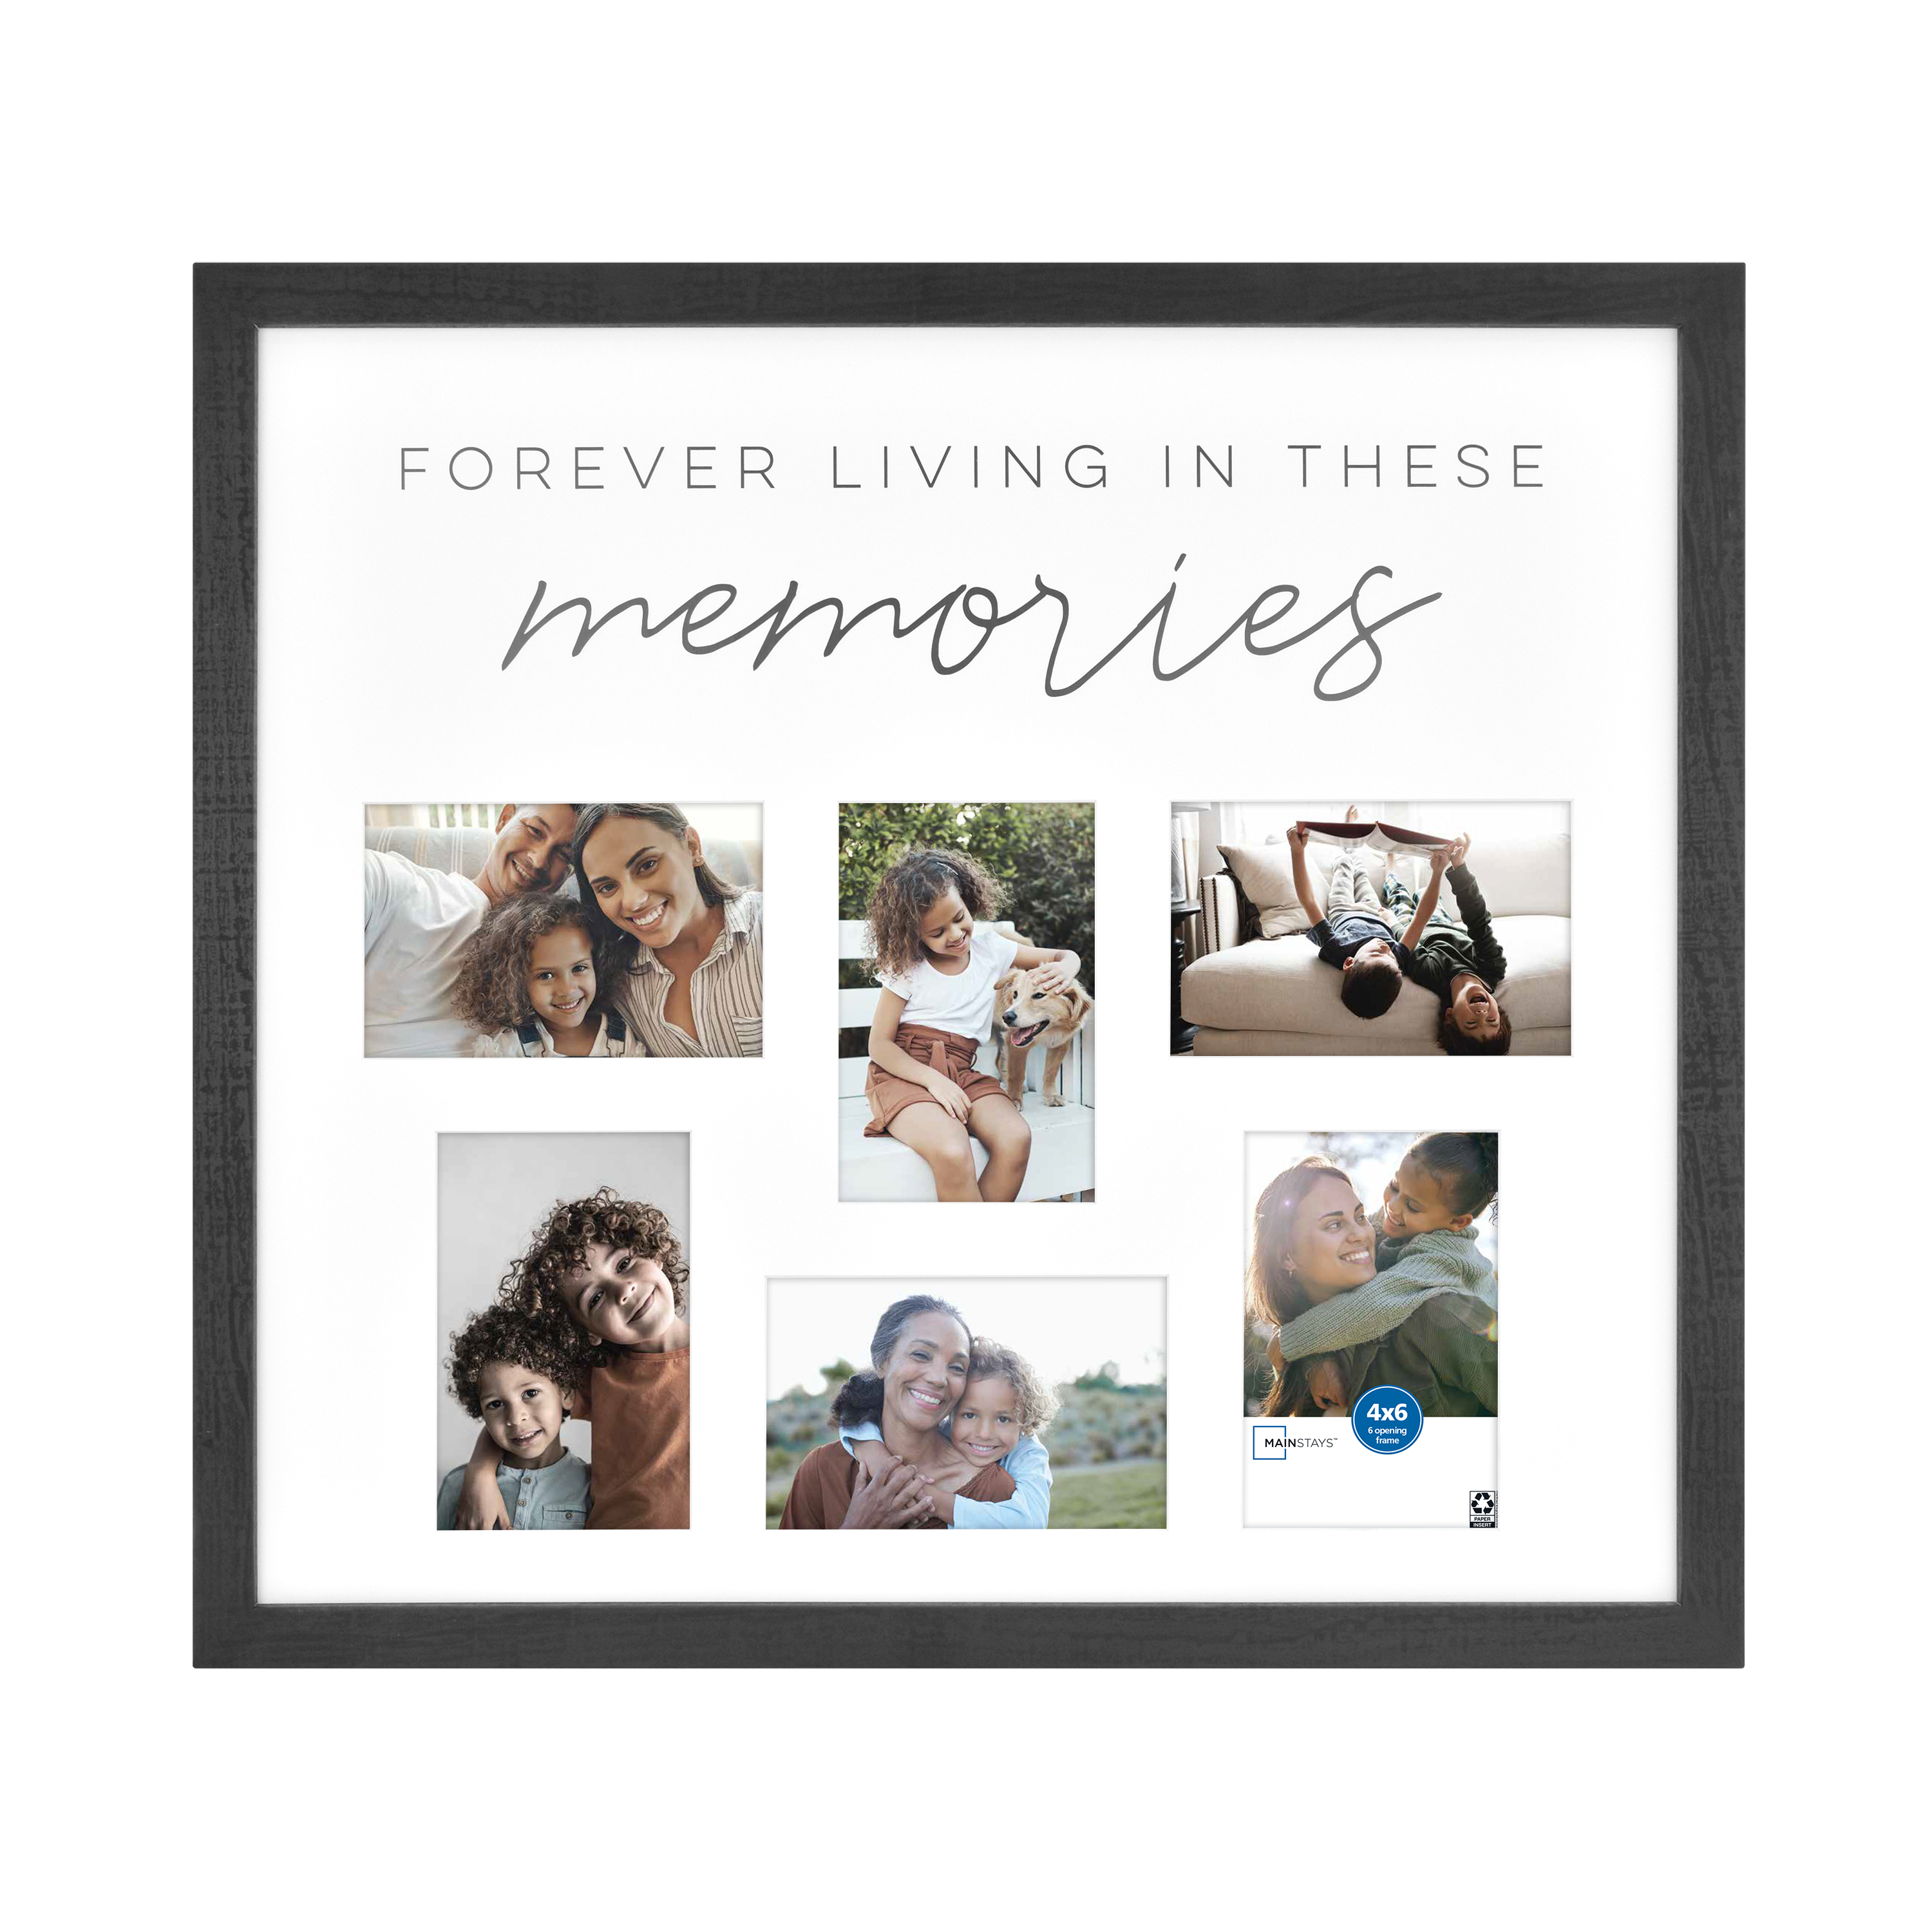 *Price Reduced*Mainstays 20" x 22" 6-Openings Collage Picture Frame (fits 4" x 6" photos) $5.24 + Free Shipping w/ Walmart+ or on $35+